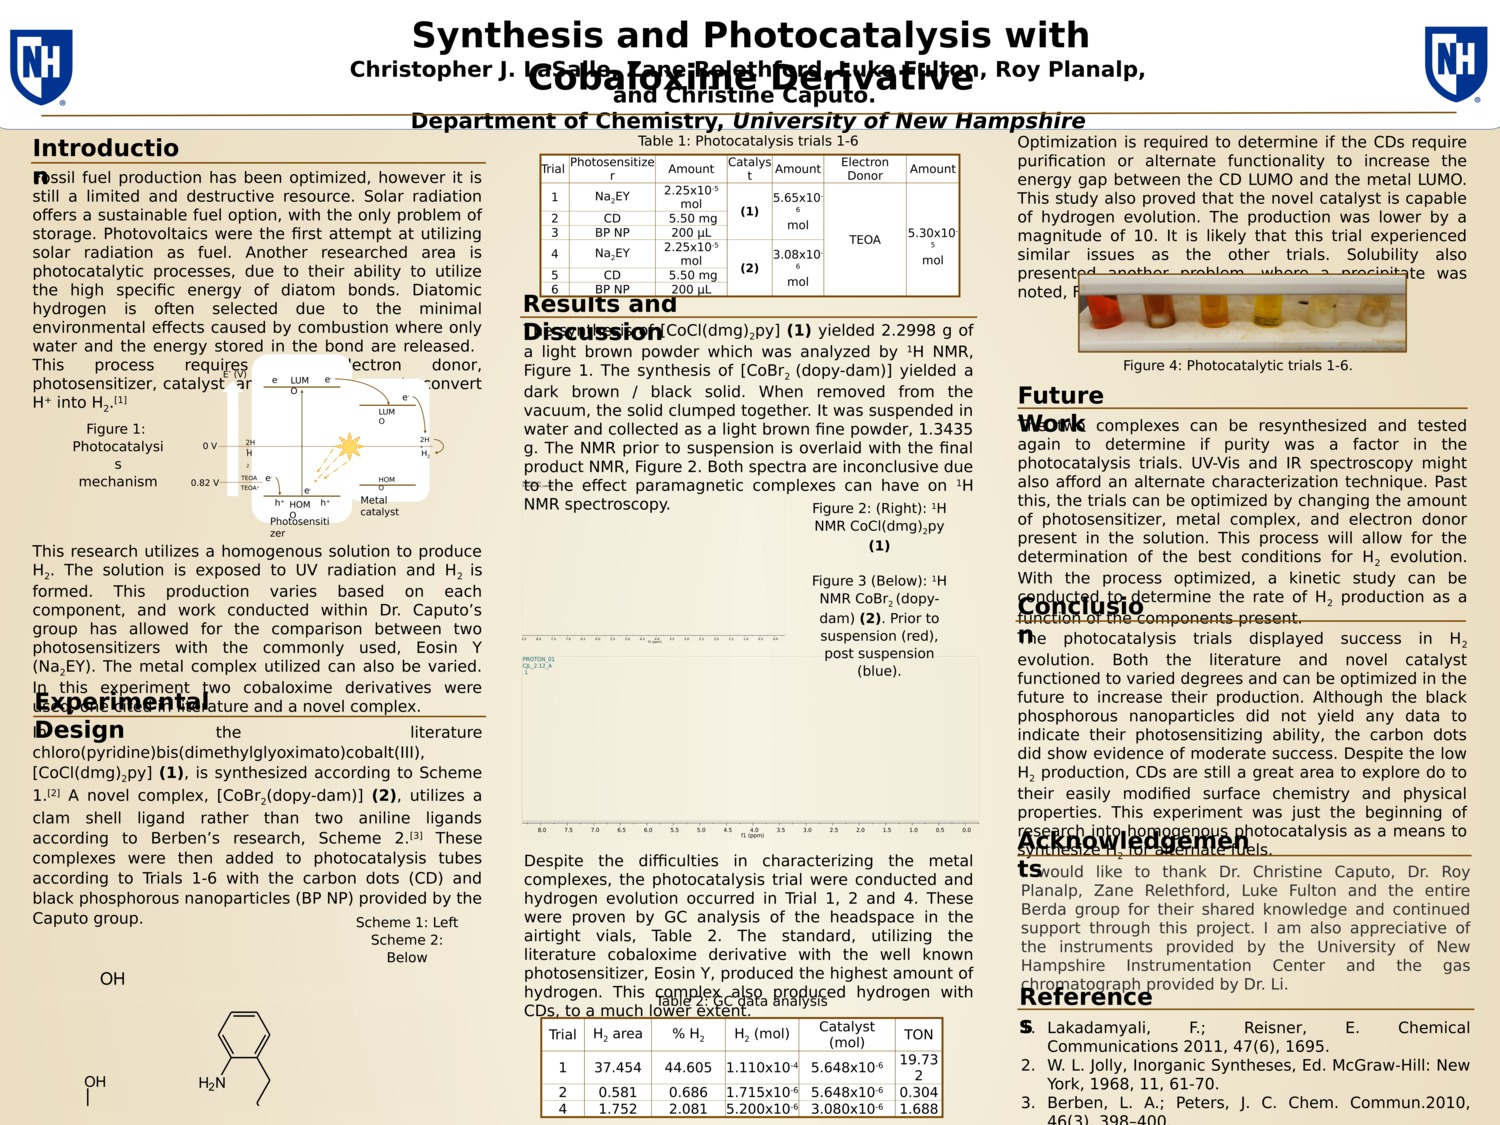 Synthesis And Photocatalysis With Cobaloxime Derivatives by cjl1014